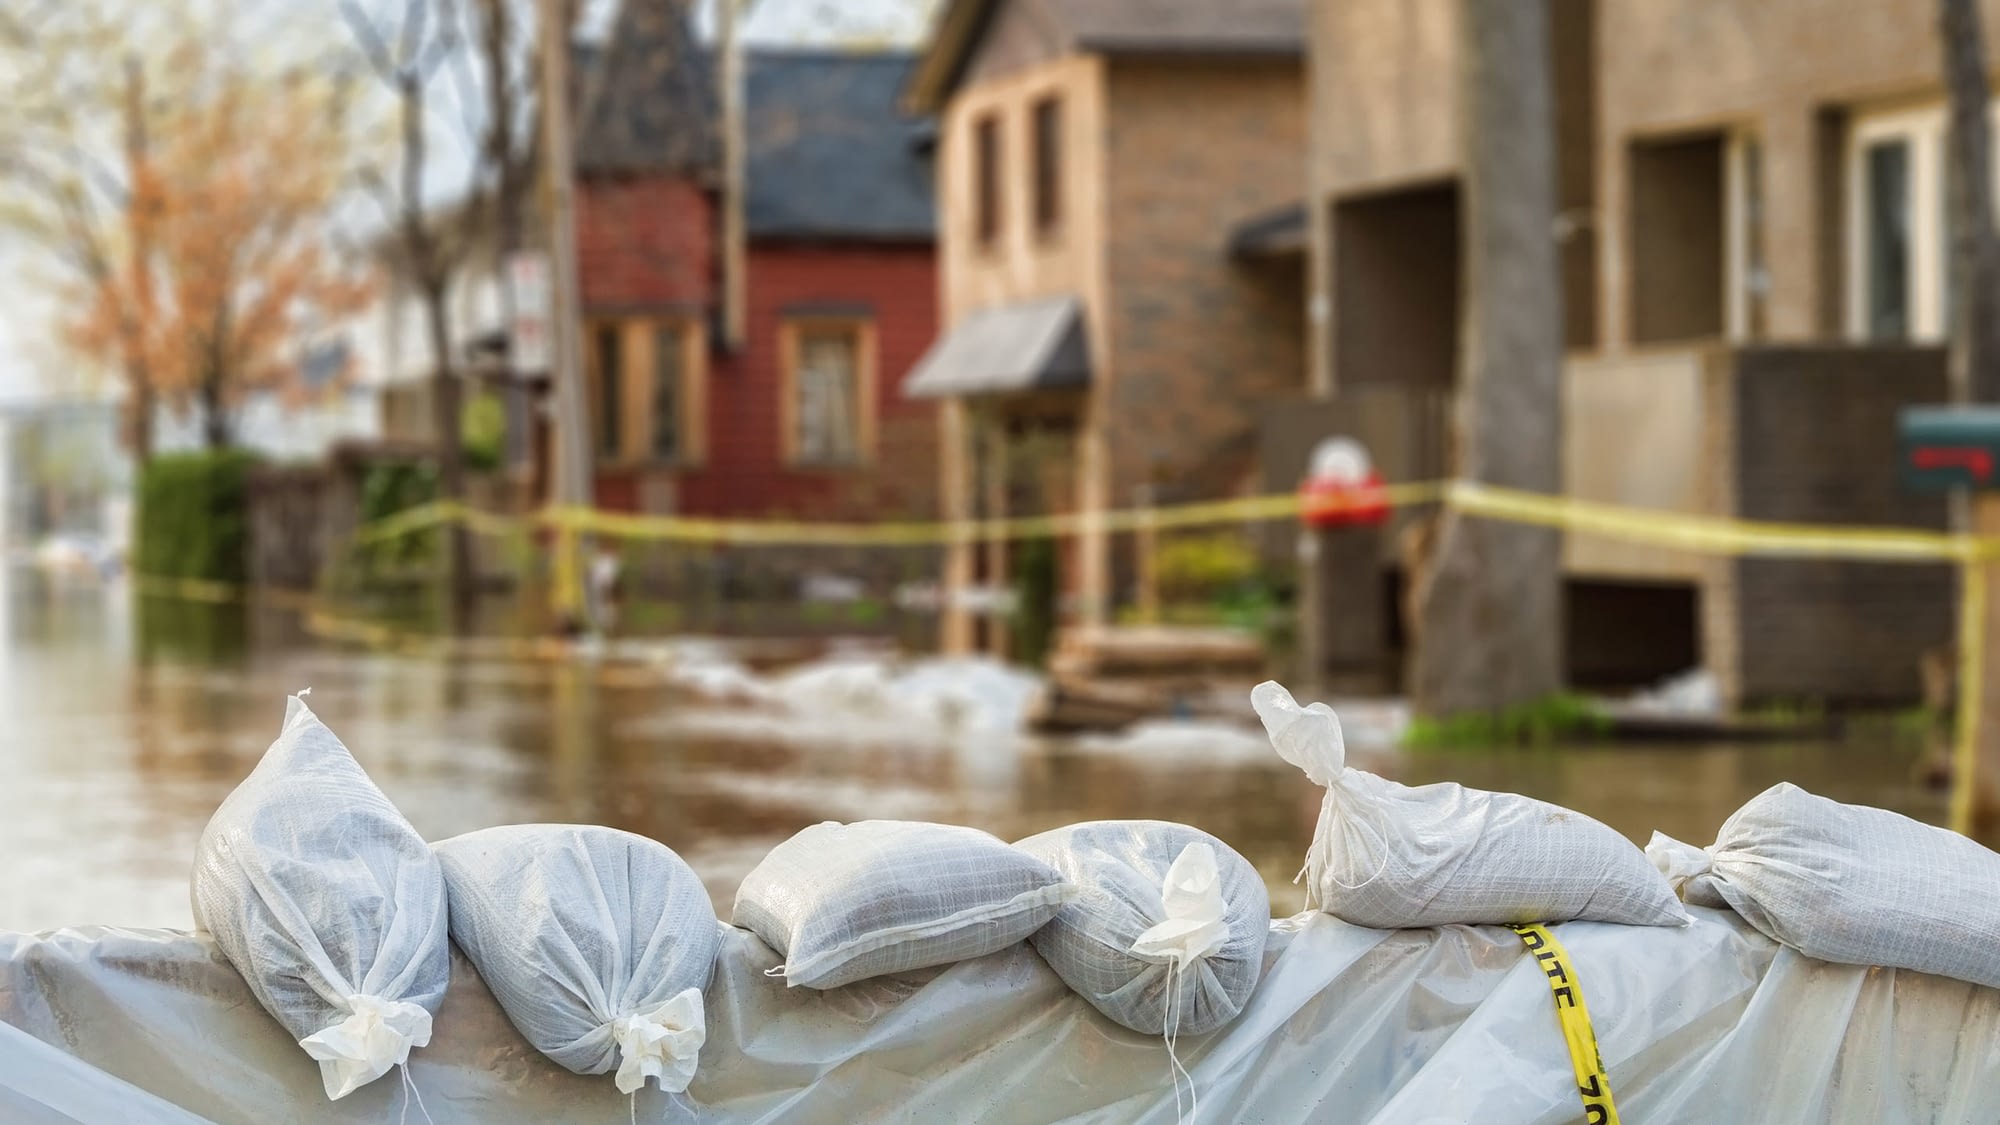 Sandbags lining the street with flooded homes in the background.